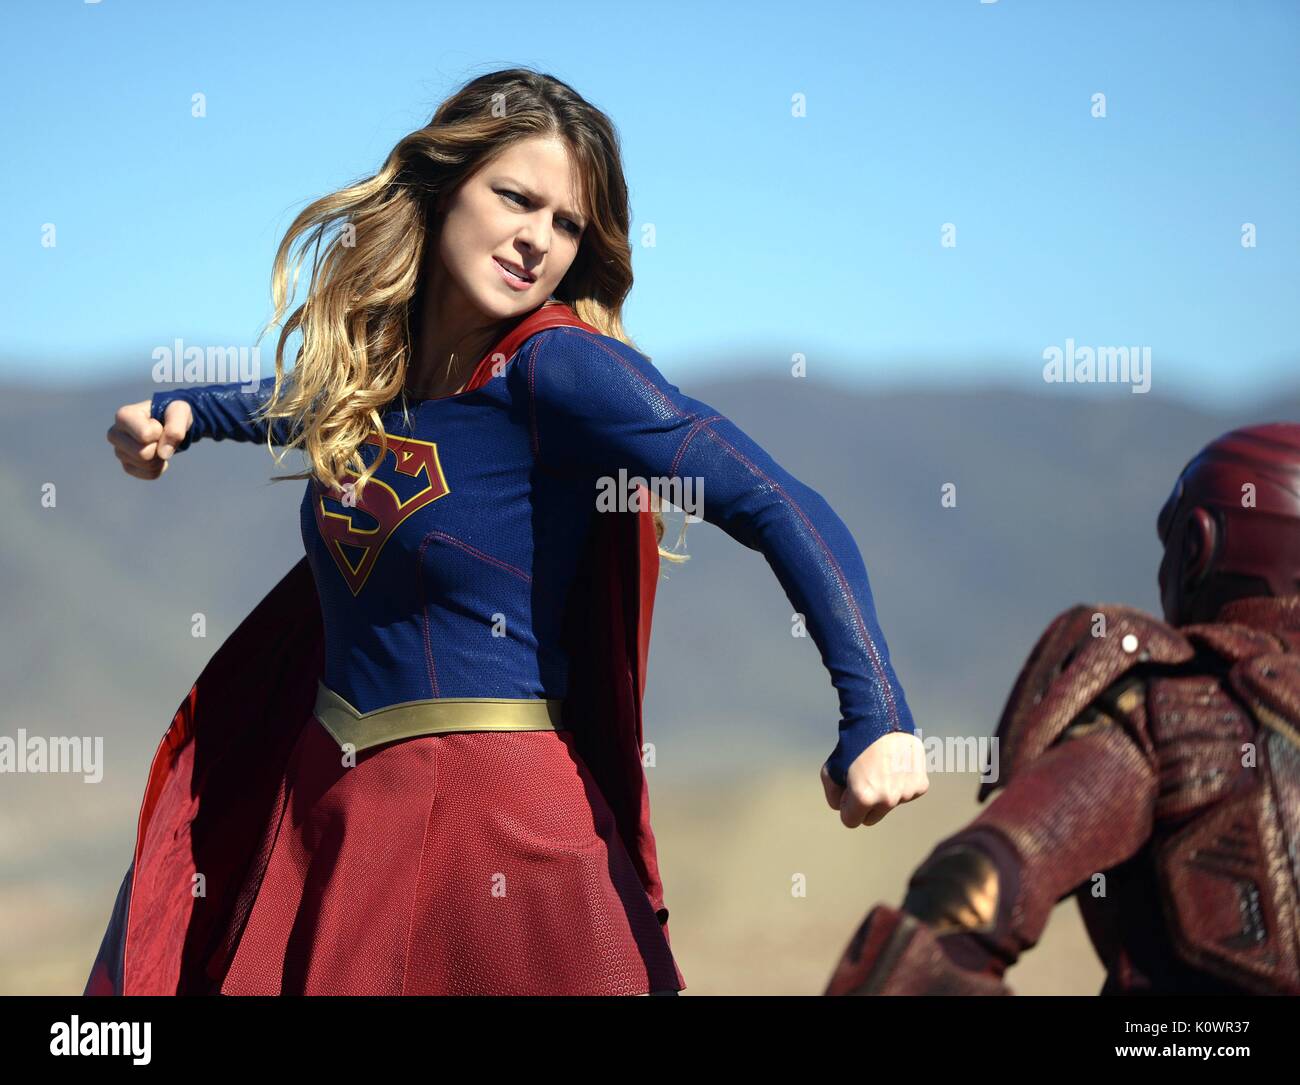 Page 2 - Supergirl Film High Resolution Stock Photography and Images - Alamy